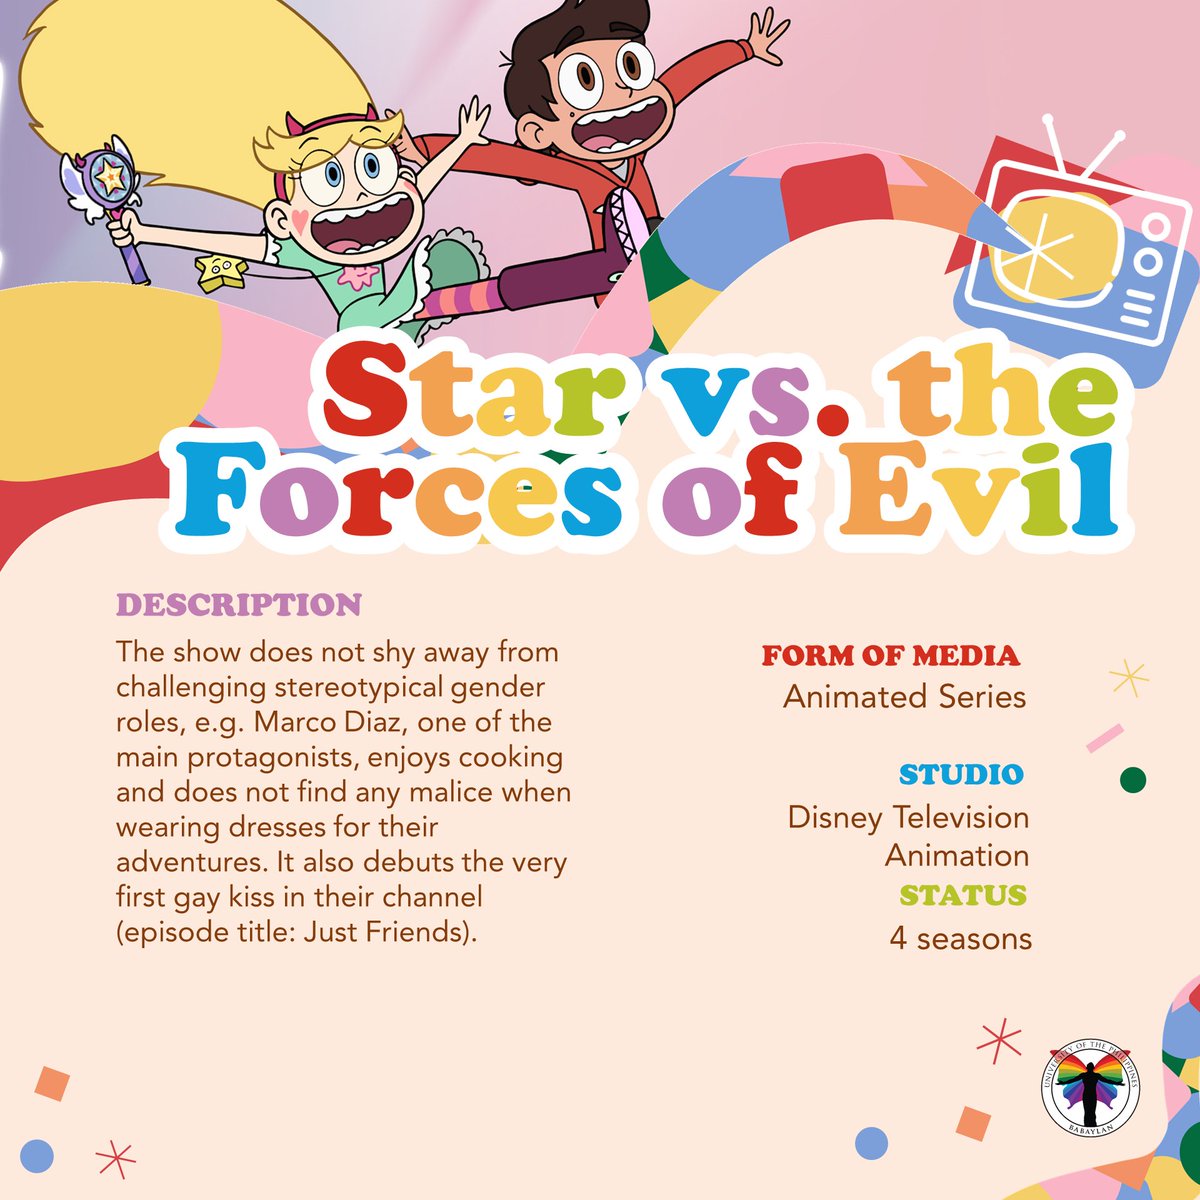 5. Star vs. the Forces of Evil